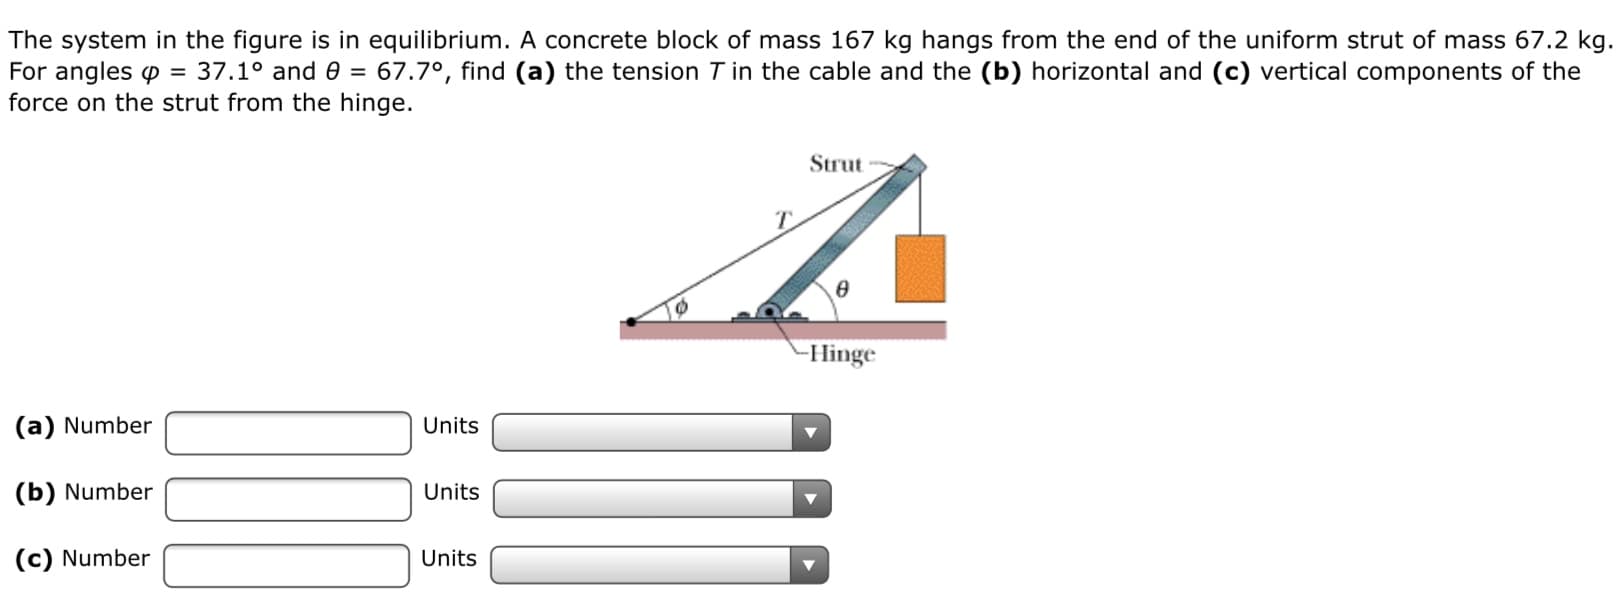 The system in the figure is in equilibrium. A concrete block of mass 167 kg hangs from the end of the uniform strut of mass 67.2 kg.
67.7°, find (a) the tension T in the cable and the (b) horizontal and (c) vertical components of the
For angles p = 37.1° and 0 =
force on the strut from the hinge.
Strut
-Hinge
(a) Number
Units
(b) Number
Units
(c) Number
Units
